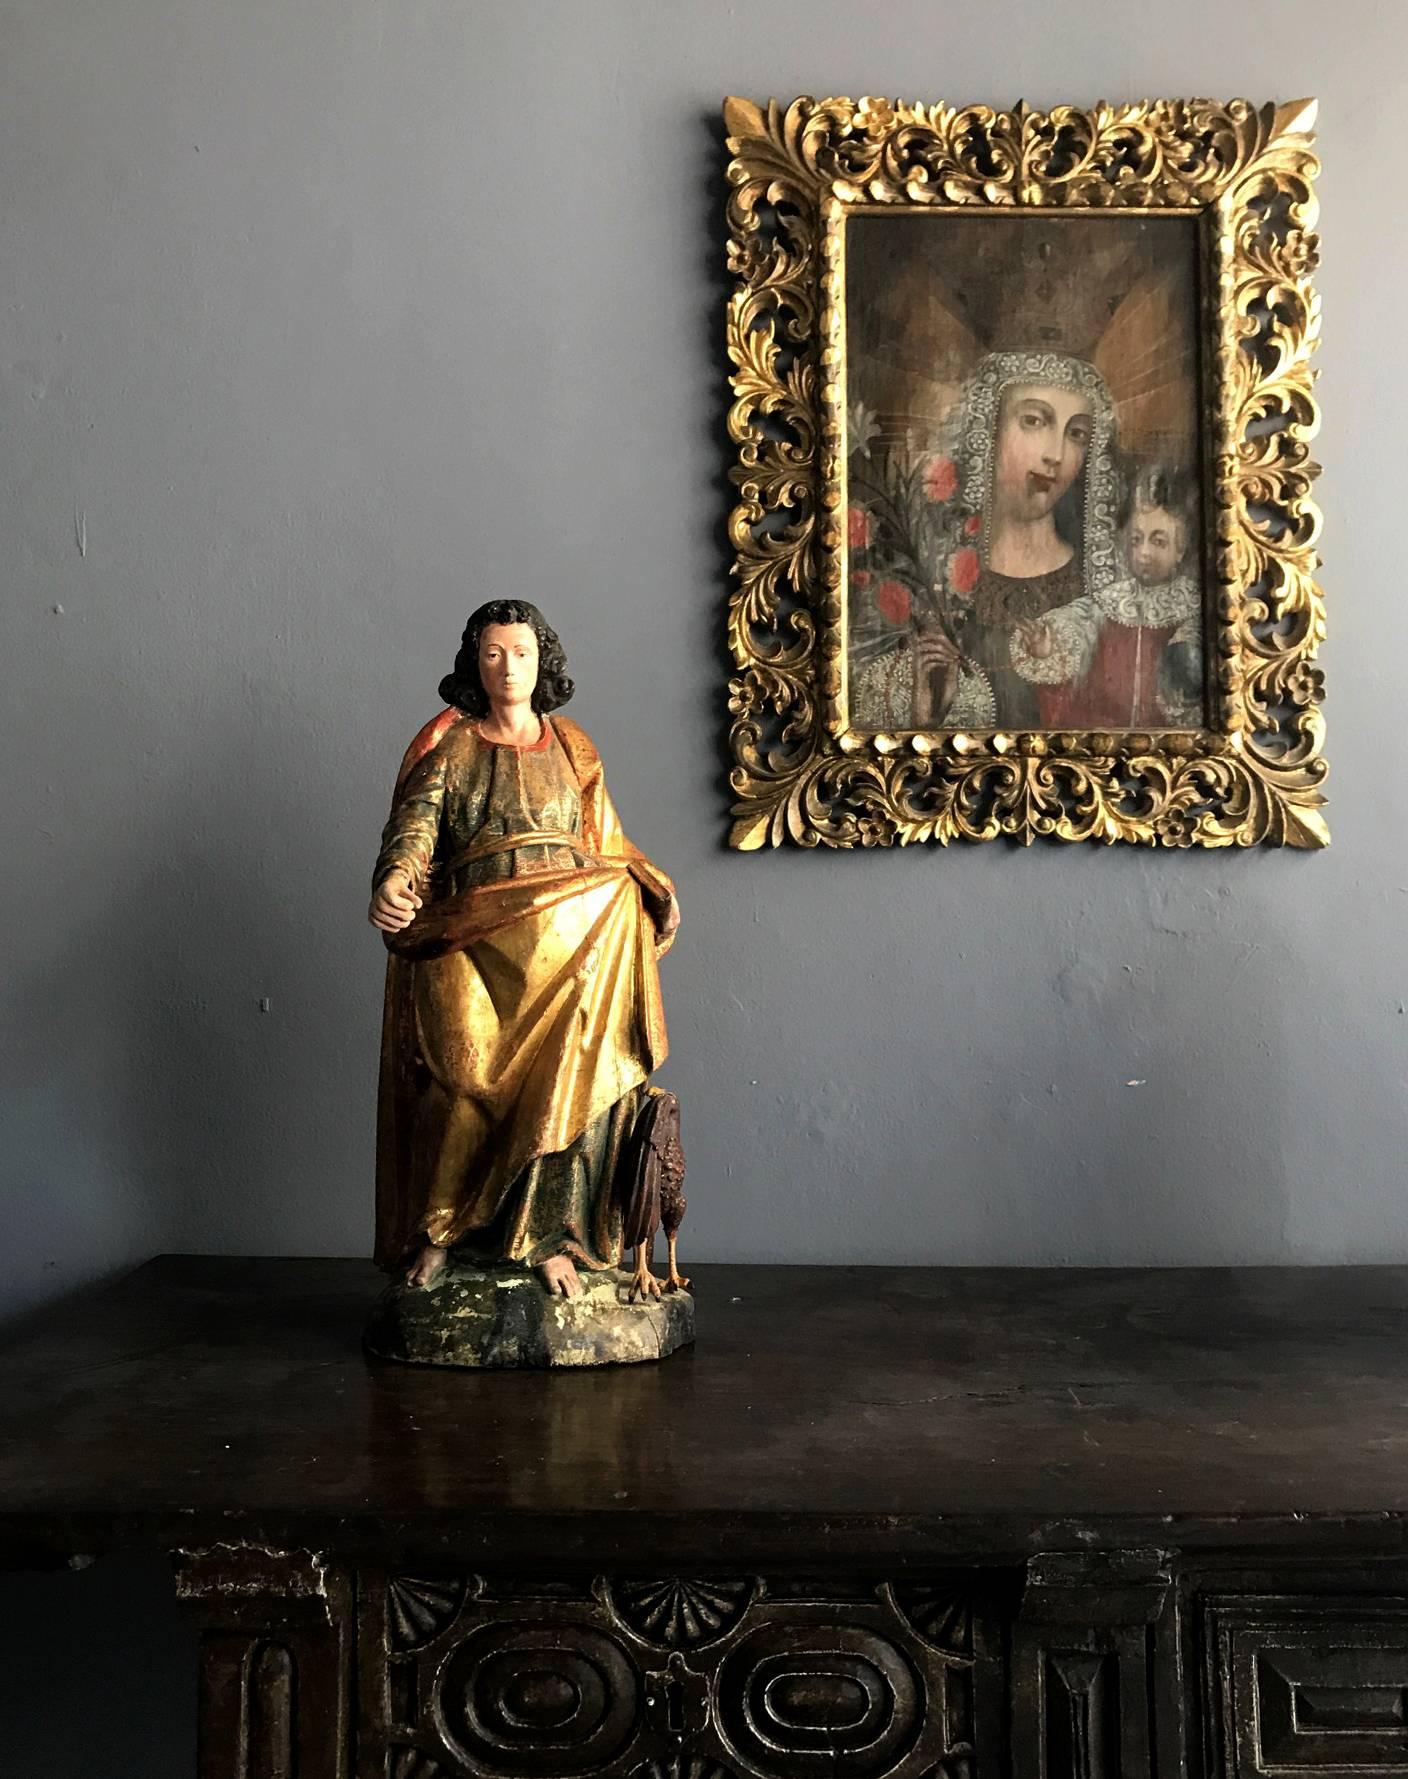 A stunning antique parcel-giltwood statue of St. John, 19th century, possibly earlier, from Mexico, Spanish Colonial with polychrome paint decoration. St John was depicted as a regal figure with robes in drapery, one arm outstretched, one arm